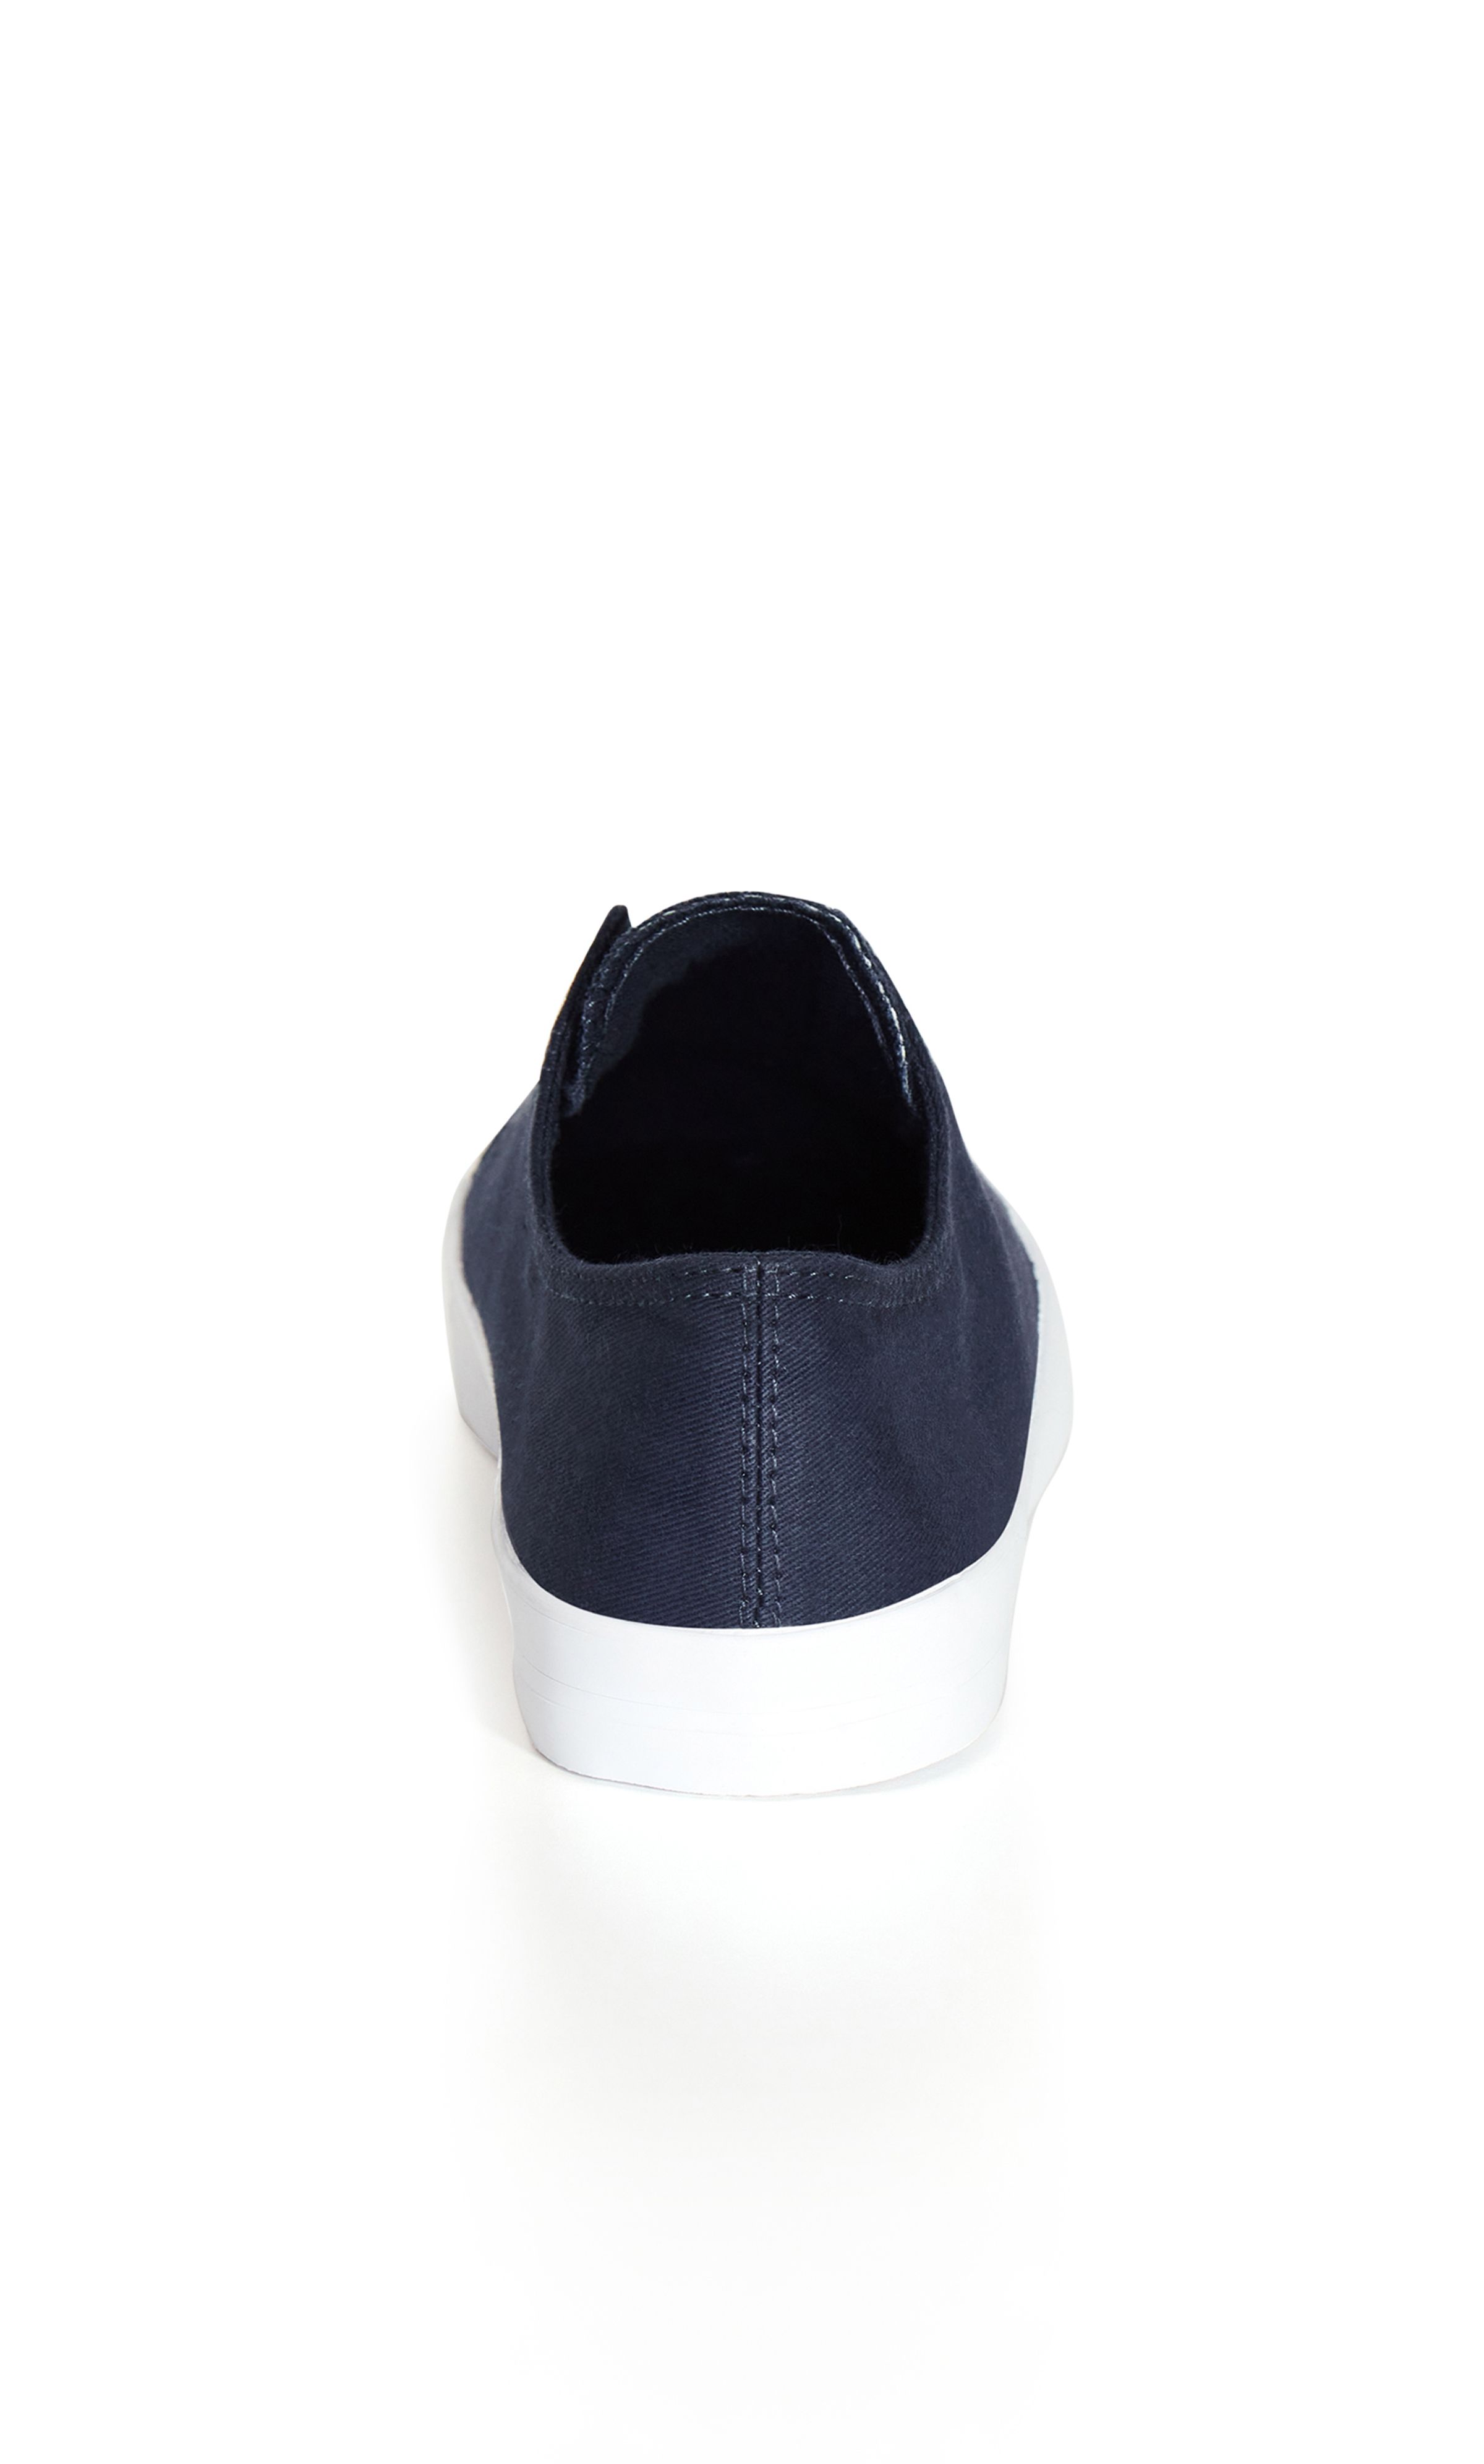 Your classic canvas trainer with a twist — it's laceless! The Laceless Trainer is bound to be on high rotation in your wardrobe this season thanks to a practical slip on style and comfortable rubber sole. Whether you're headed to the shops or a quick coffee catch up, this pair has you covered. Key Features Include: - Round toe - Laceless front - Canvas fabric upper - Slip on style - Thick sole Keep it casual in a slogan tee and long shorts, finishing with your favourite tote.